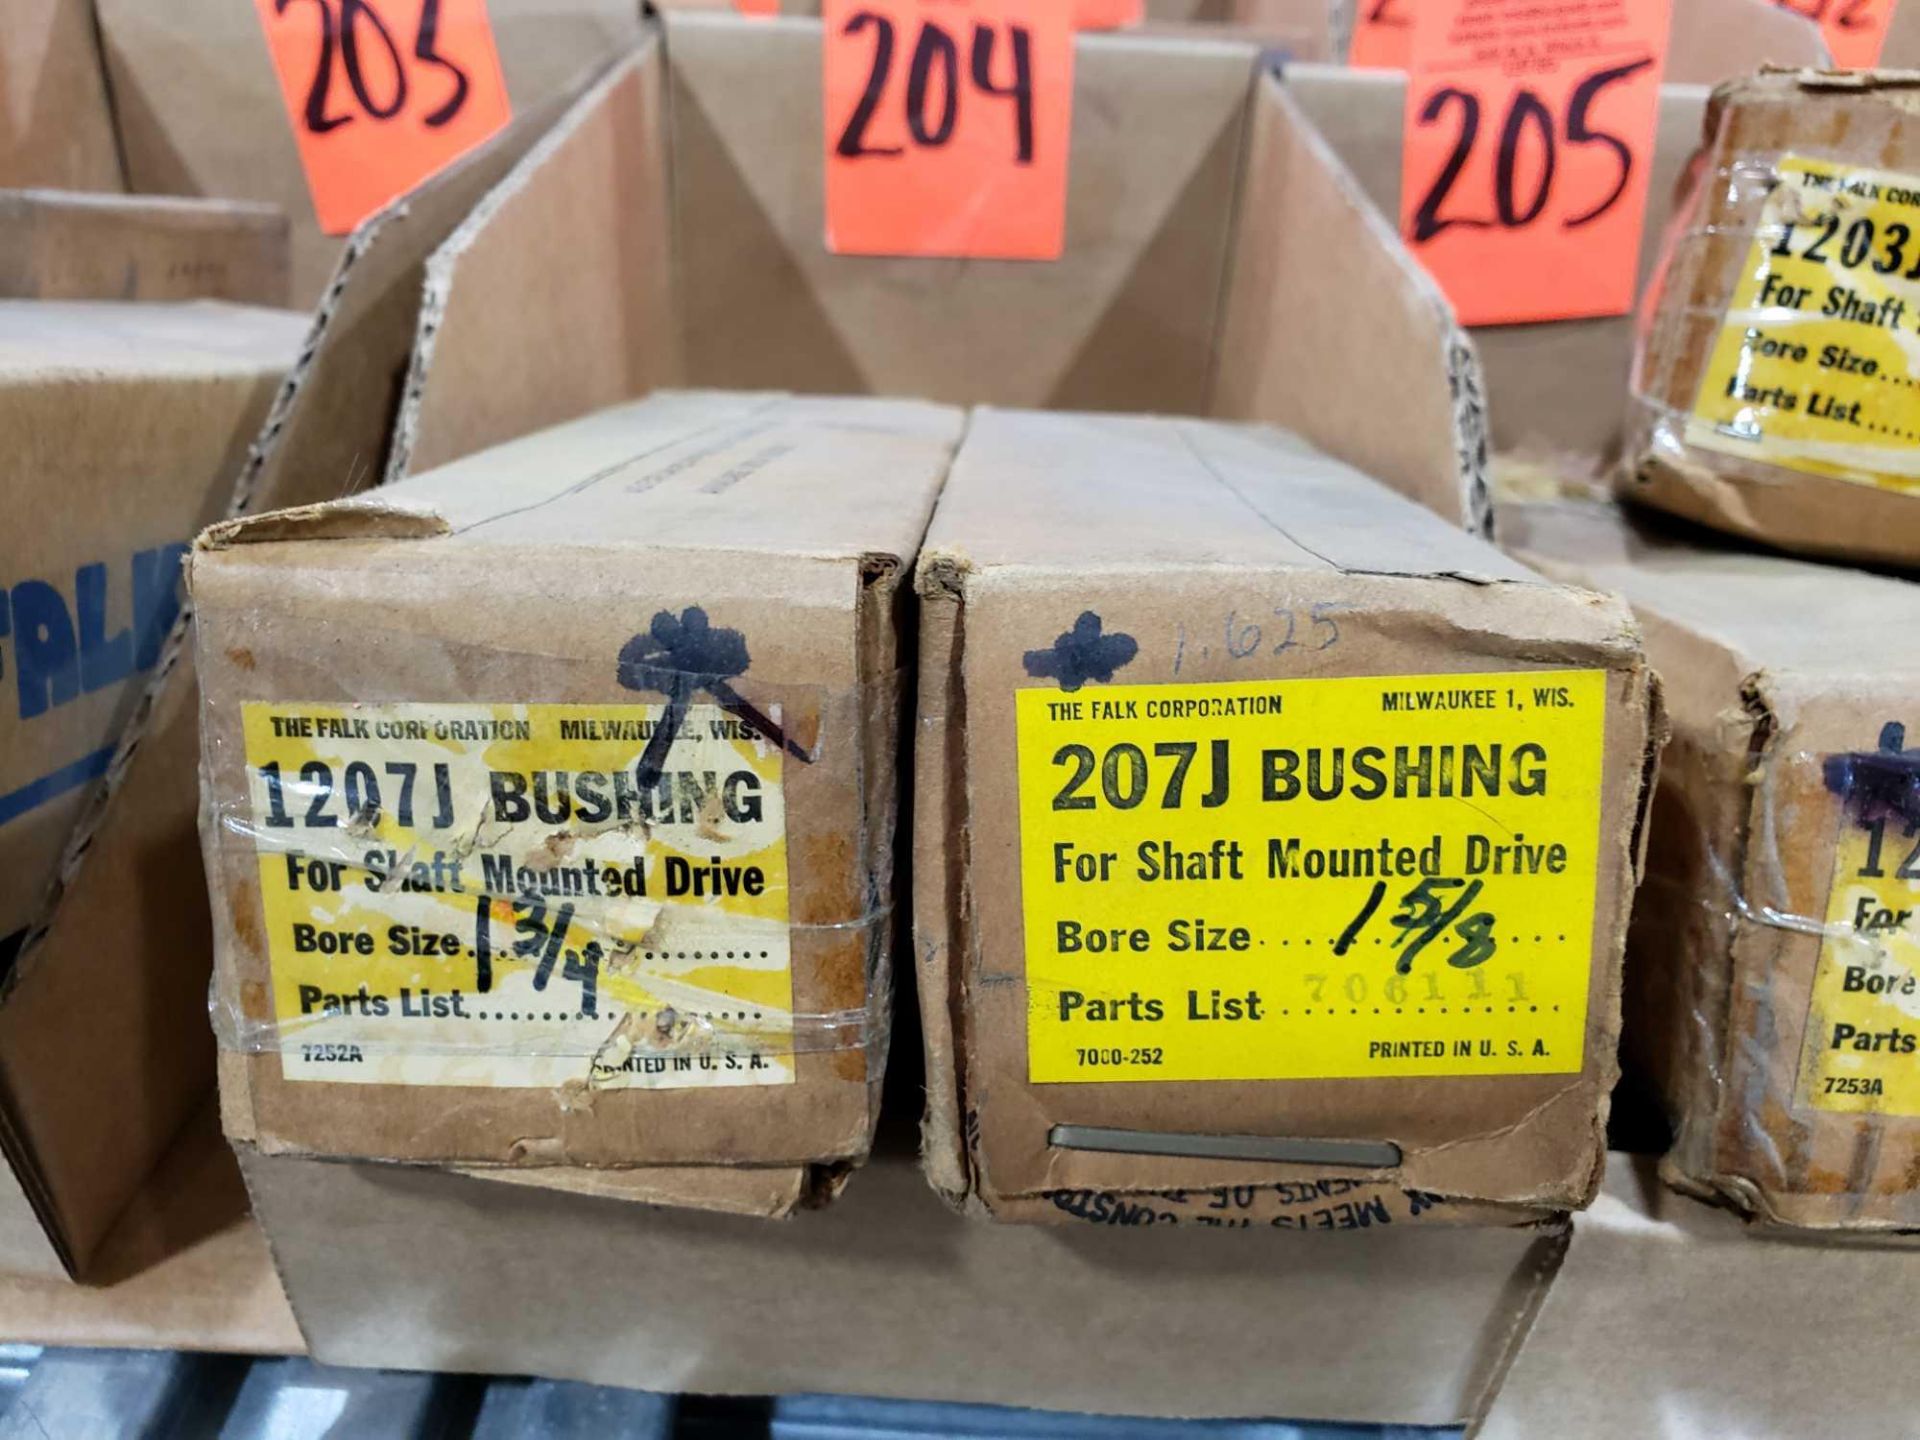 Qty 2 - Falk shaft bushing model 1207J and 207J. New in boxes. - Image 2 of 2